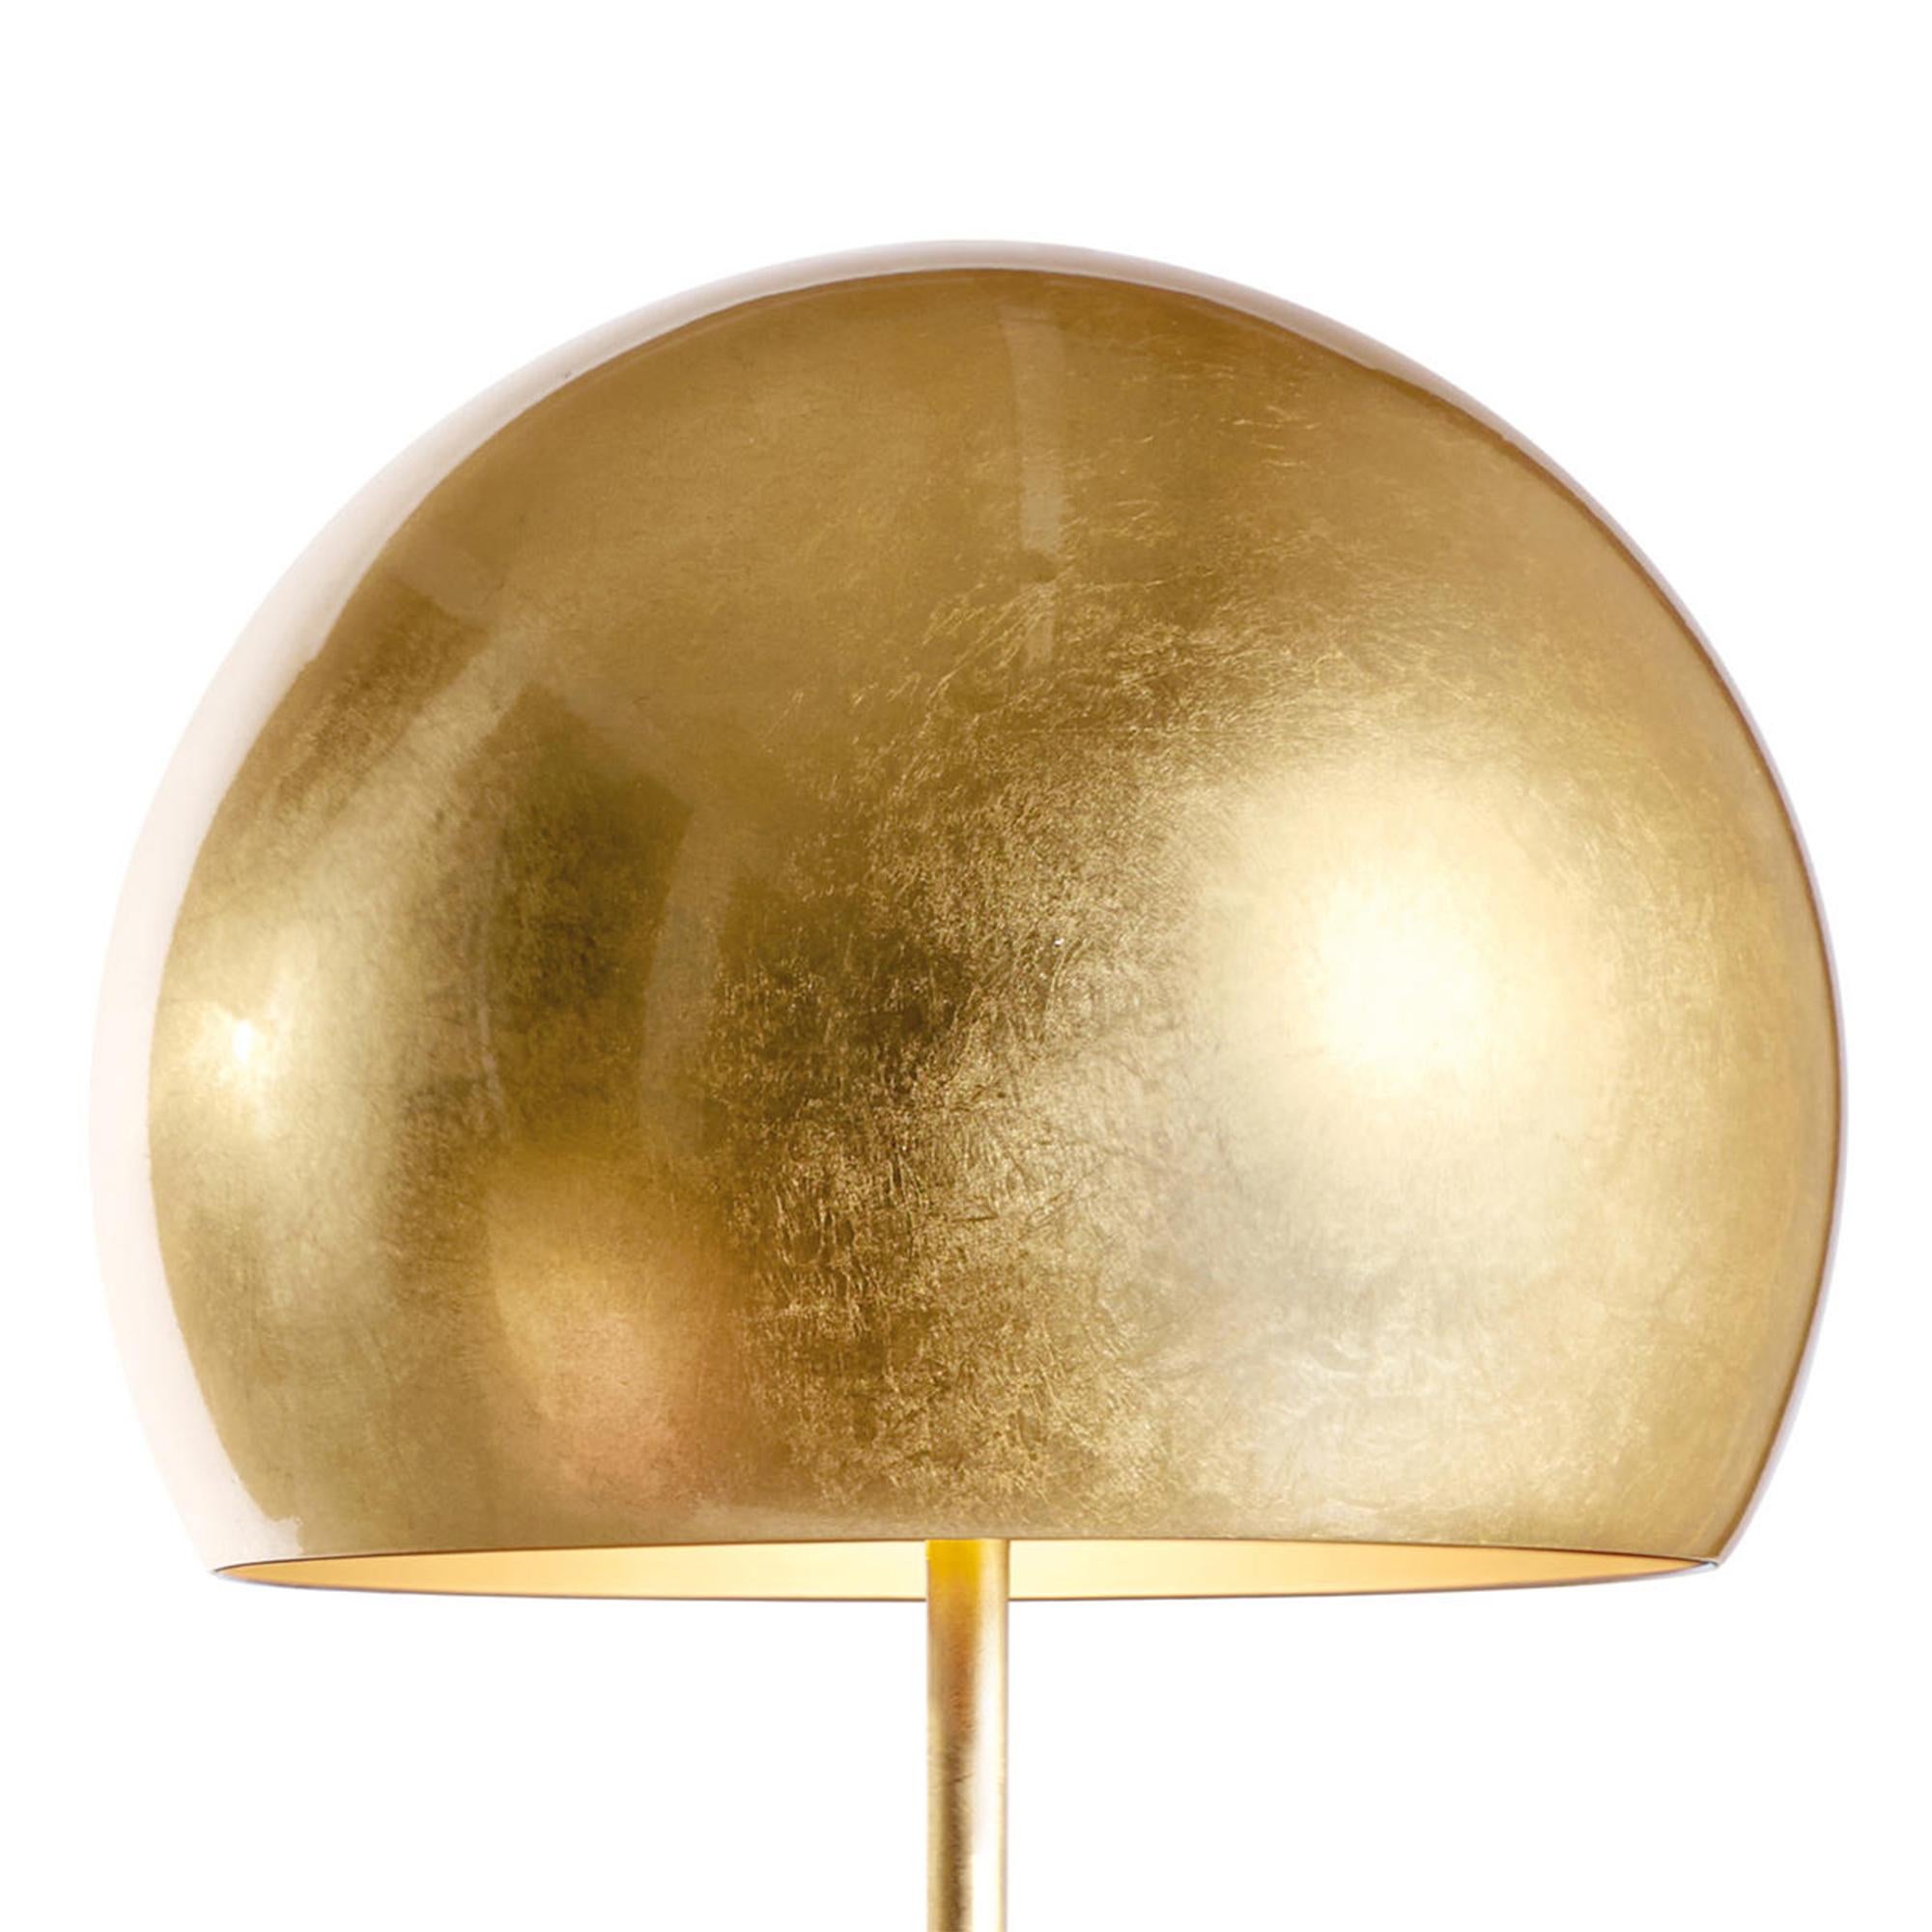 Table lamp dome gold leaf with iron base and feet
and with aluminium shade all covered with gold leaf
and in gold varnished inside shade. With 2 bulbs, lamp
holder type E27, max 60 watt. Bulbs not included.
In Ø 45 x H 80cm, price: 2750,00€.
Also